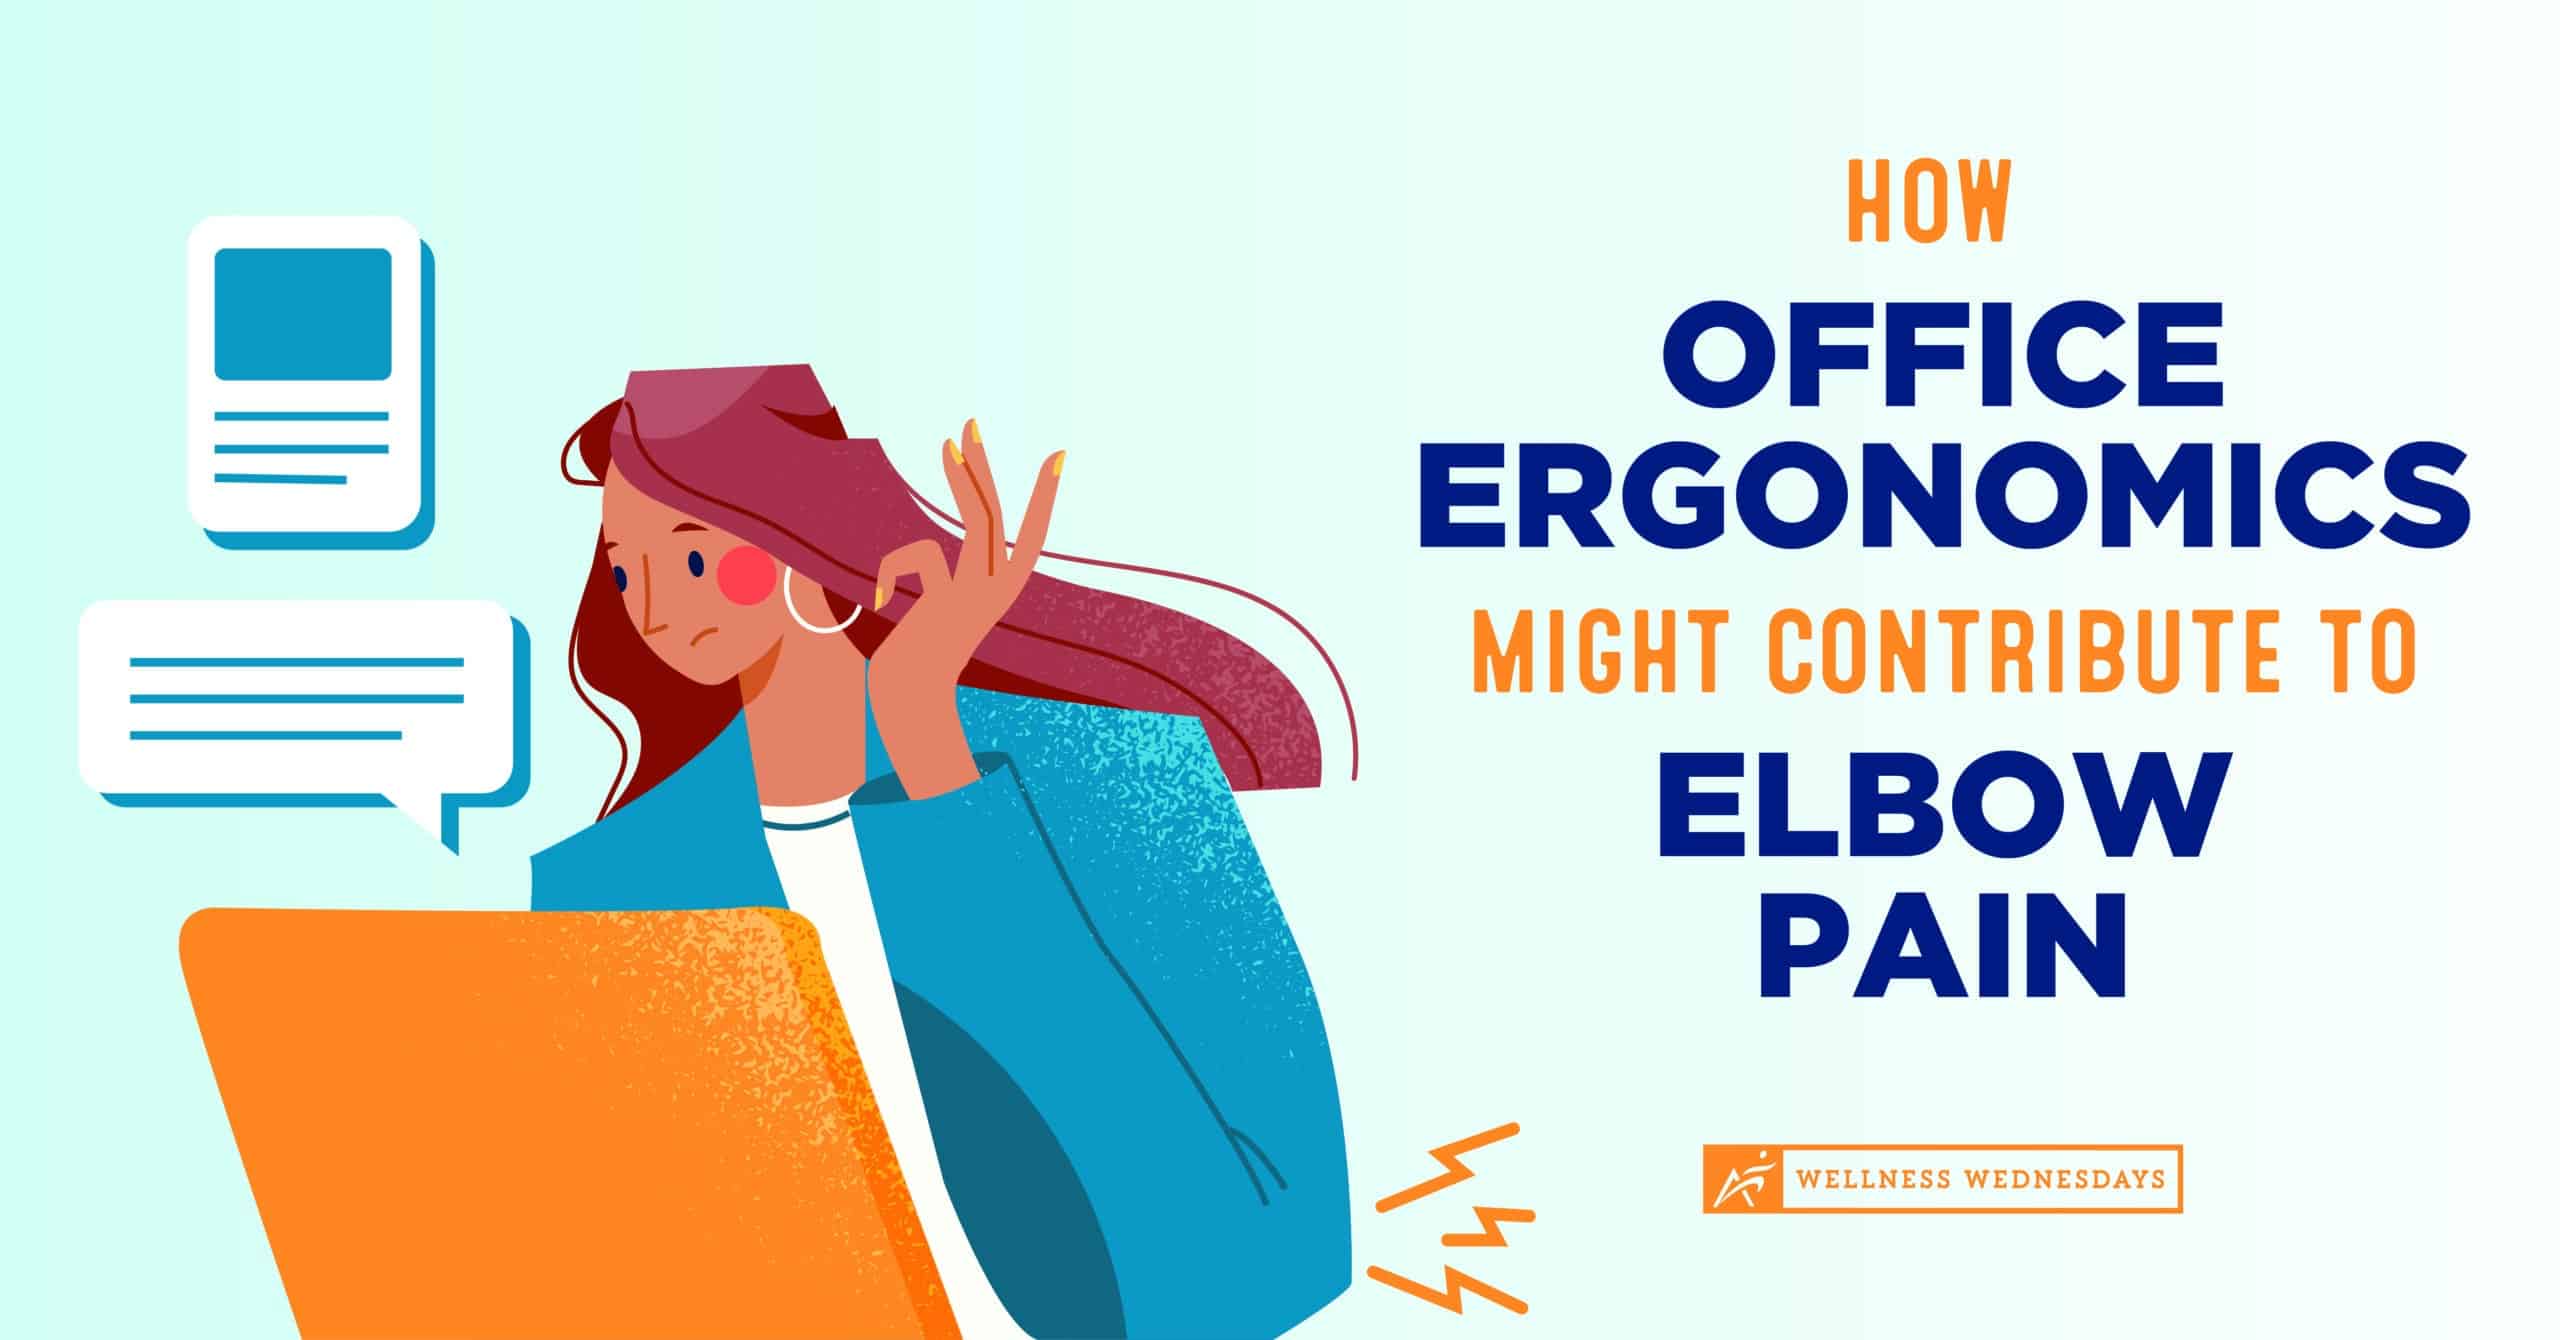 How Office Ergonomics Might Contribute to Elbow Pain